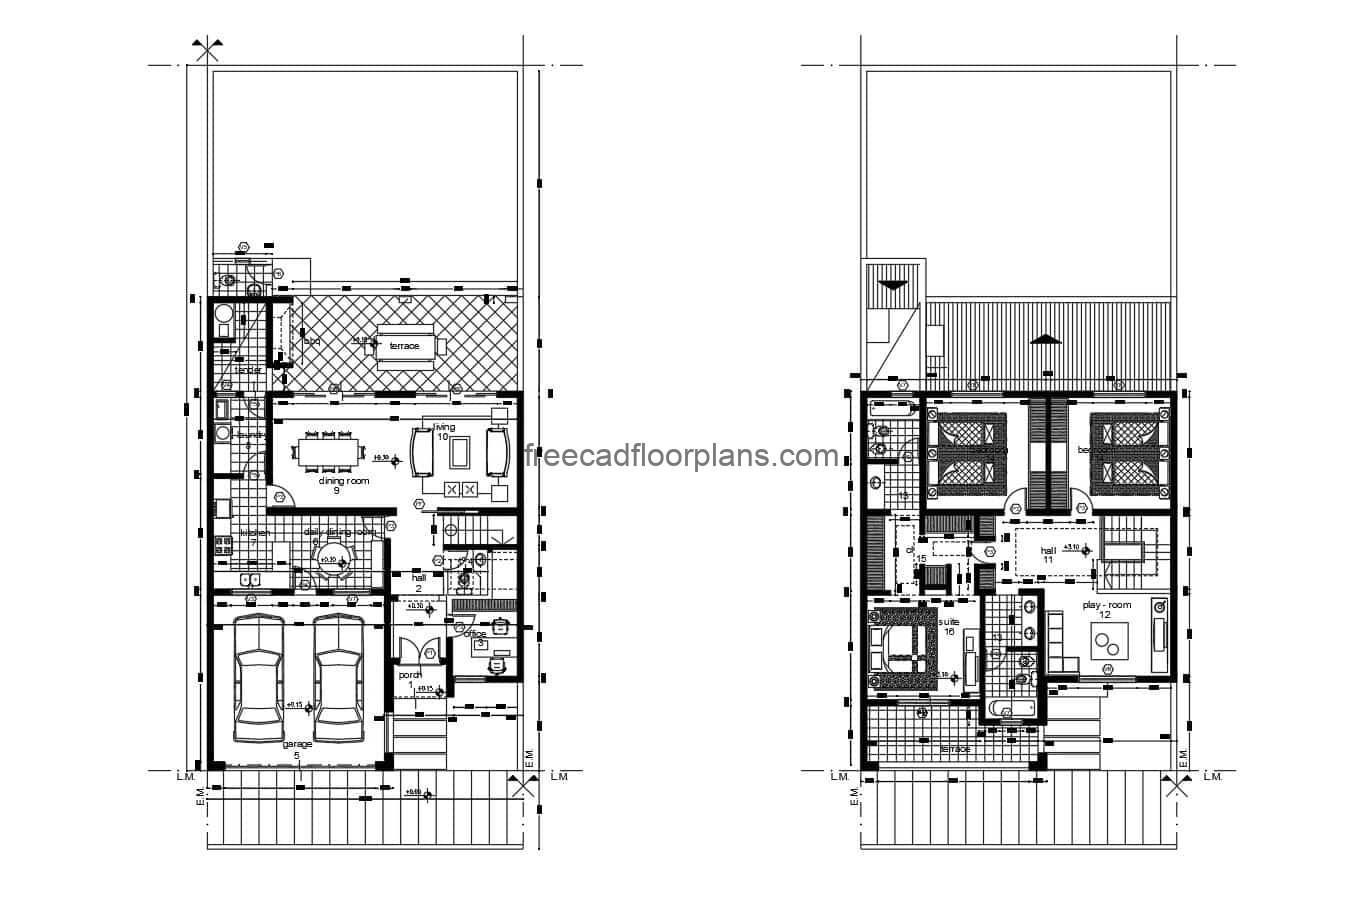 Architectural project and dimensioning of a two-level residence with three rooms in total on the second level. First level with garage area for two vehicles, living room, office, dining area, kitchen, rear terrace, laundry area and bbq area. 2D plans in Autocad DWG format for free download. The plans include, architectural, sizing, roof plan, elevations, sections.